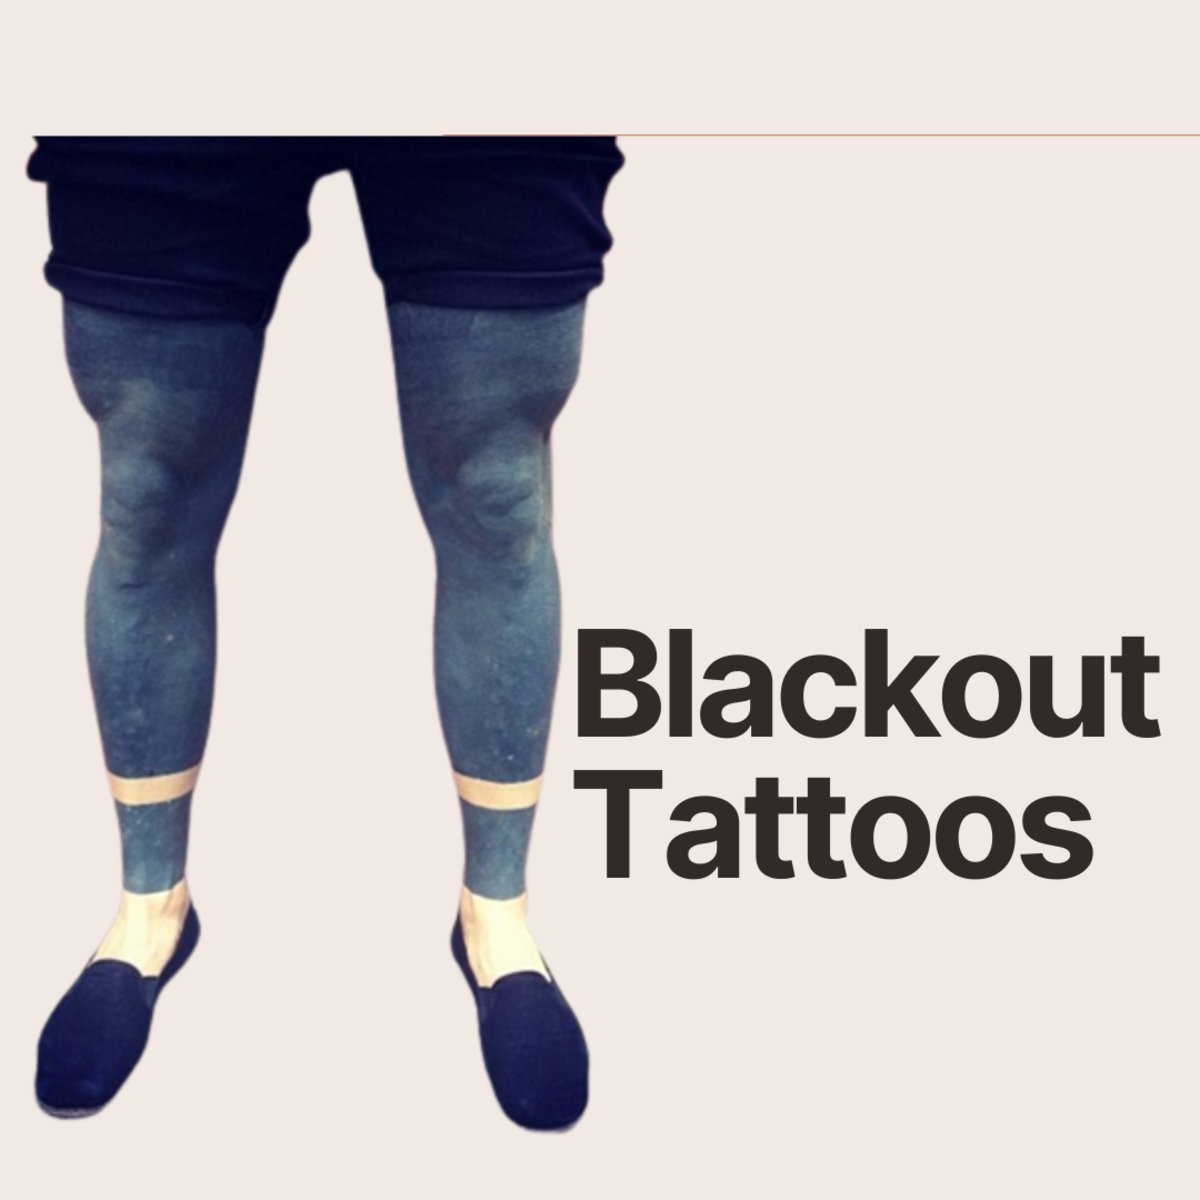 What is a blackout tattoo Heres why you should think twice before getting  one  SCREENSHOT